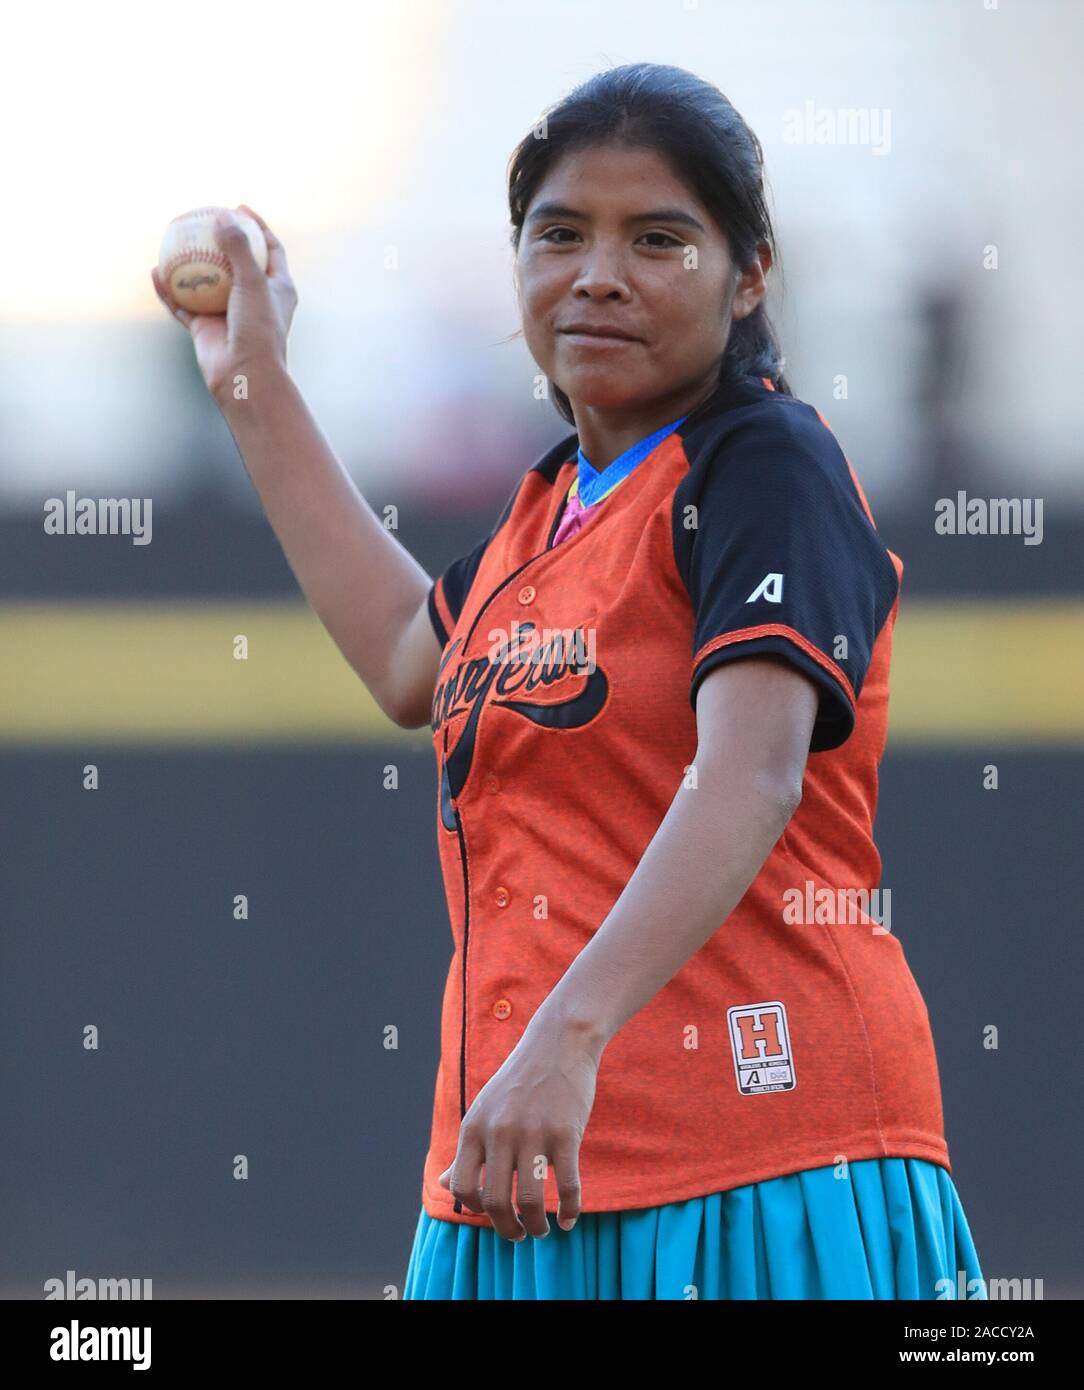 María Lorena Ramírez Hernández, Mexican background runner from the rarámuri  indigenous community, appeared at the Sonora stadium for the launch of the  first ball during the baseball match between Algodoneros vs Naranjeros.